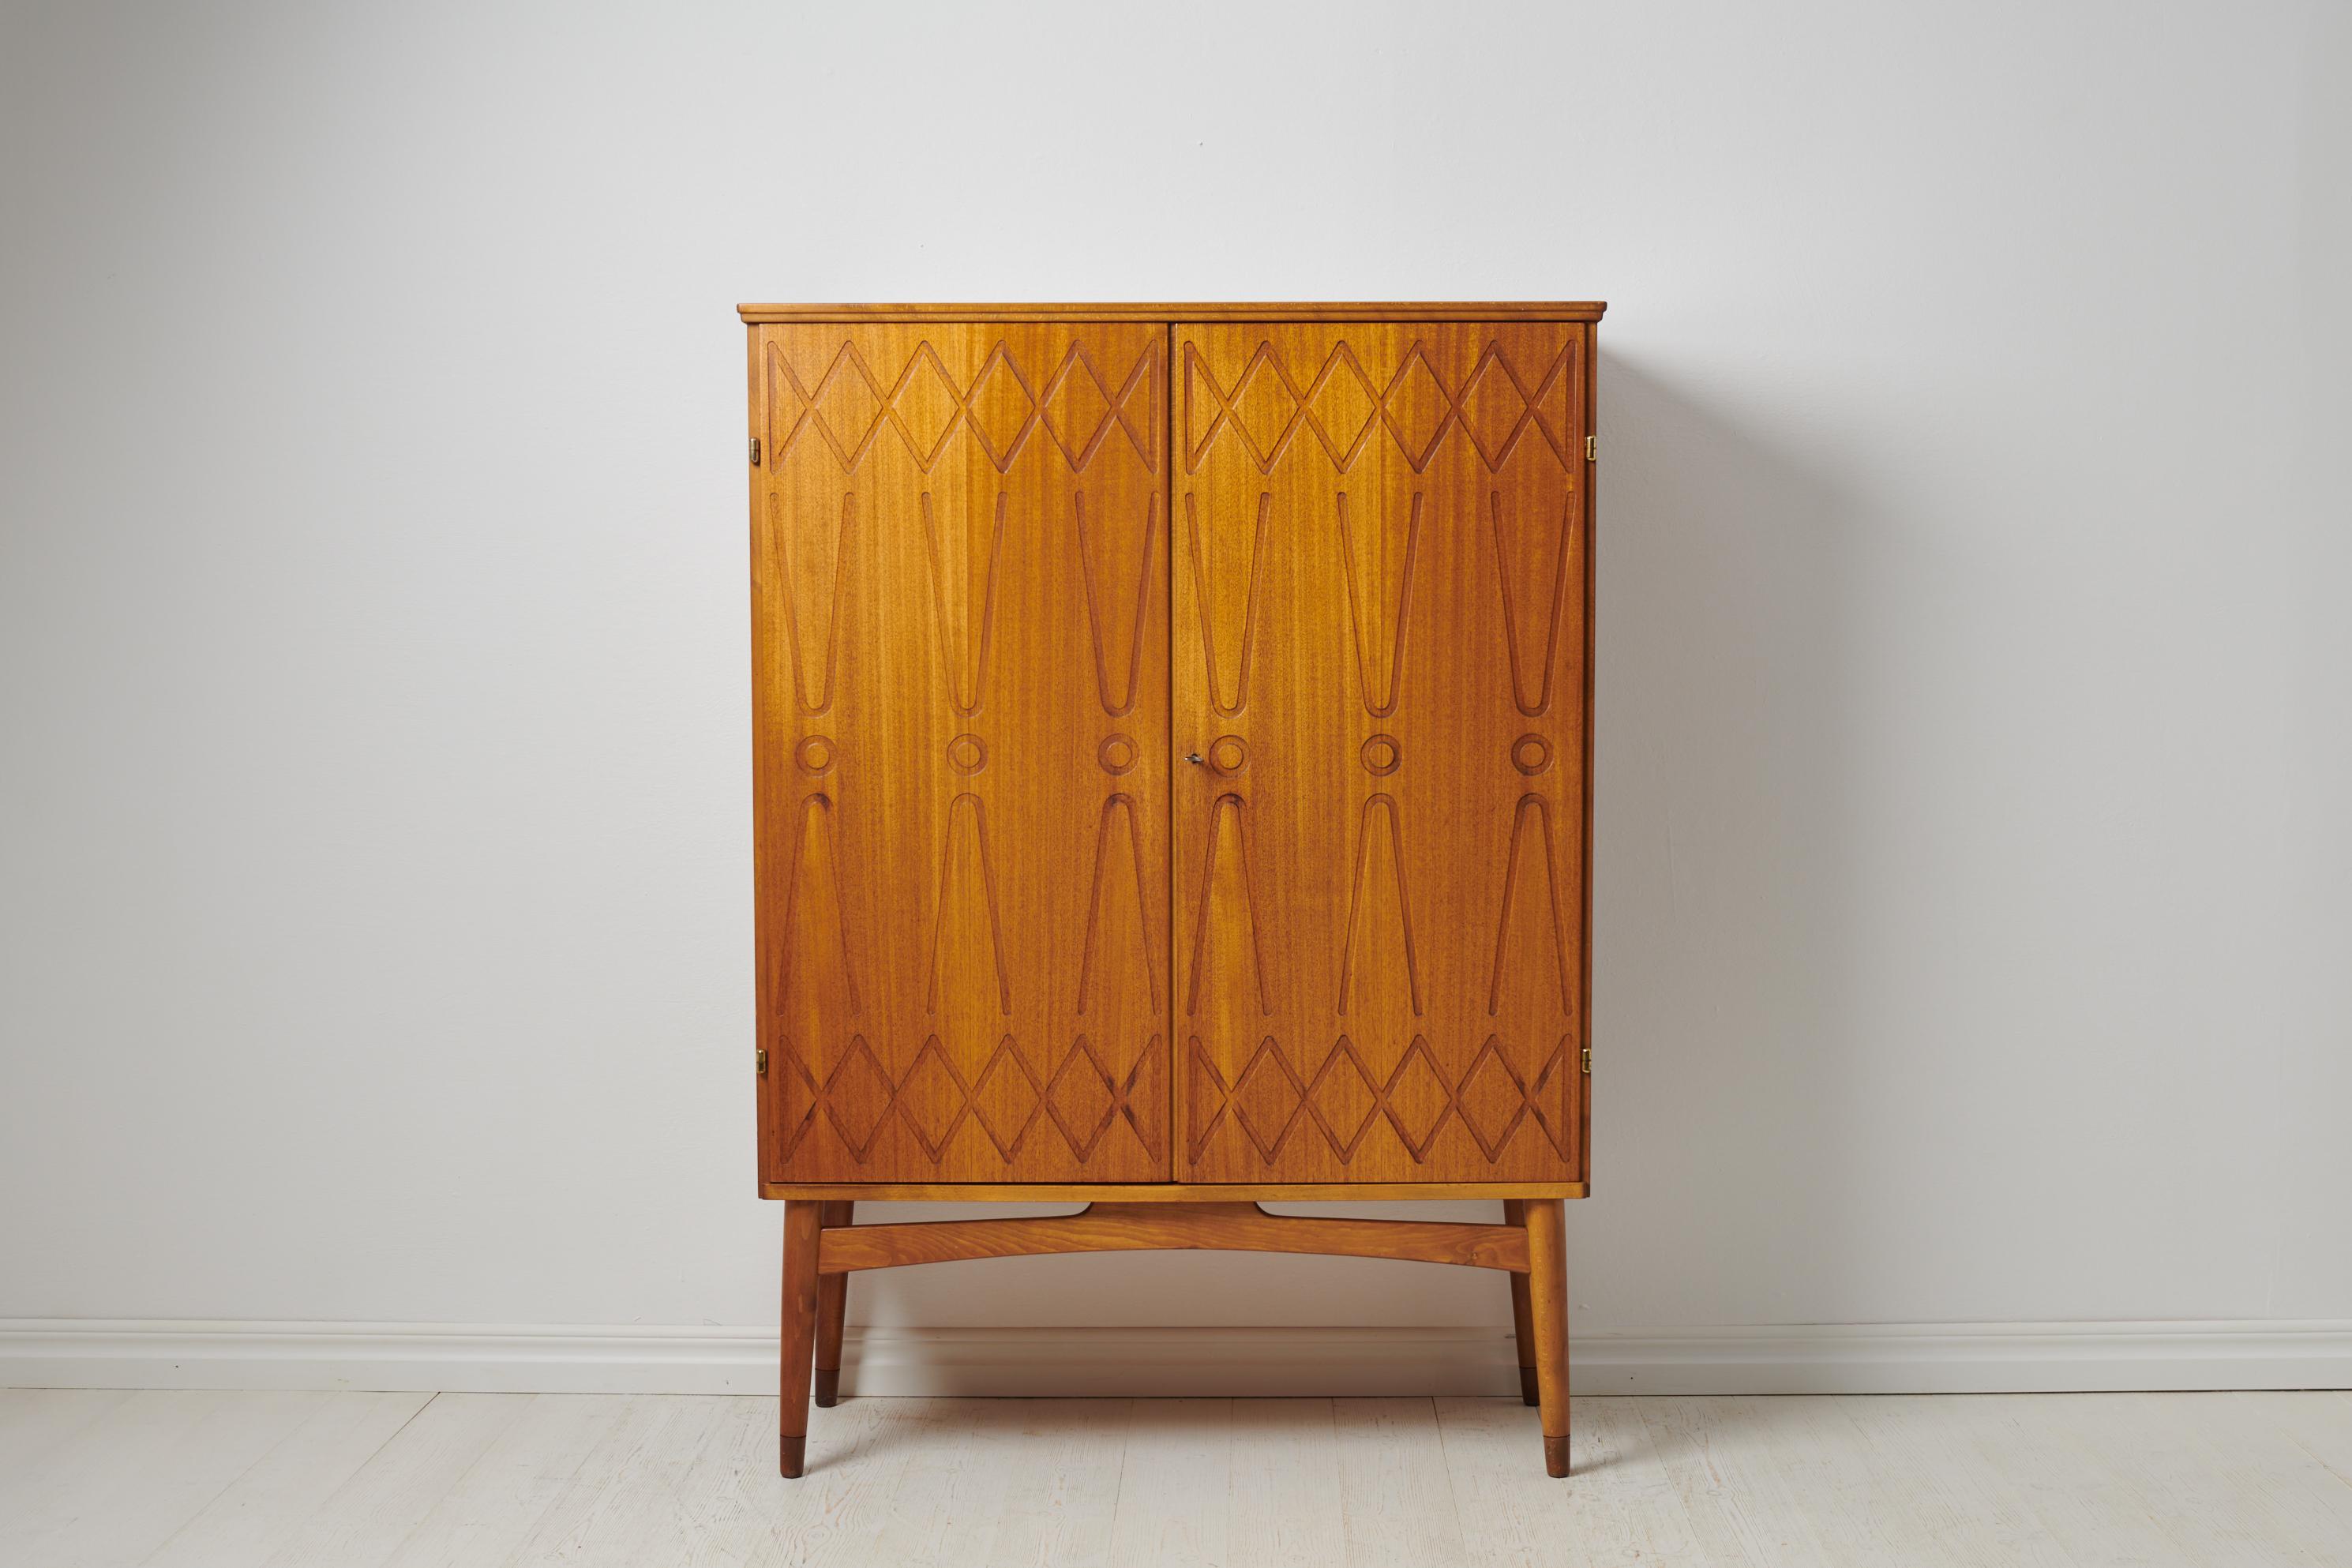 Swedish modern teak cabinet ”Rickard” designed by Kirke Nielsen and made by Abrahamssons Möbelfabrik in Smålands Taberg. The cabinet is from the mid 20th century, during the 1950s and features a pair of doors with embossed decor. The doors open to